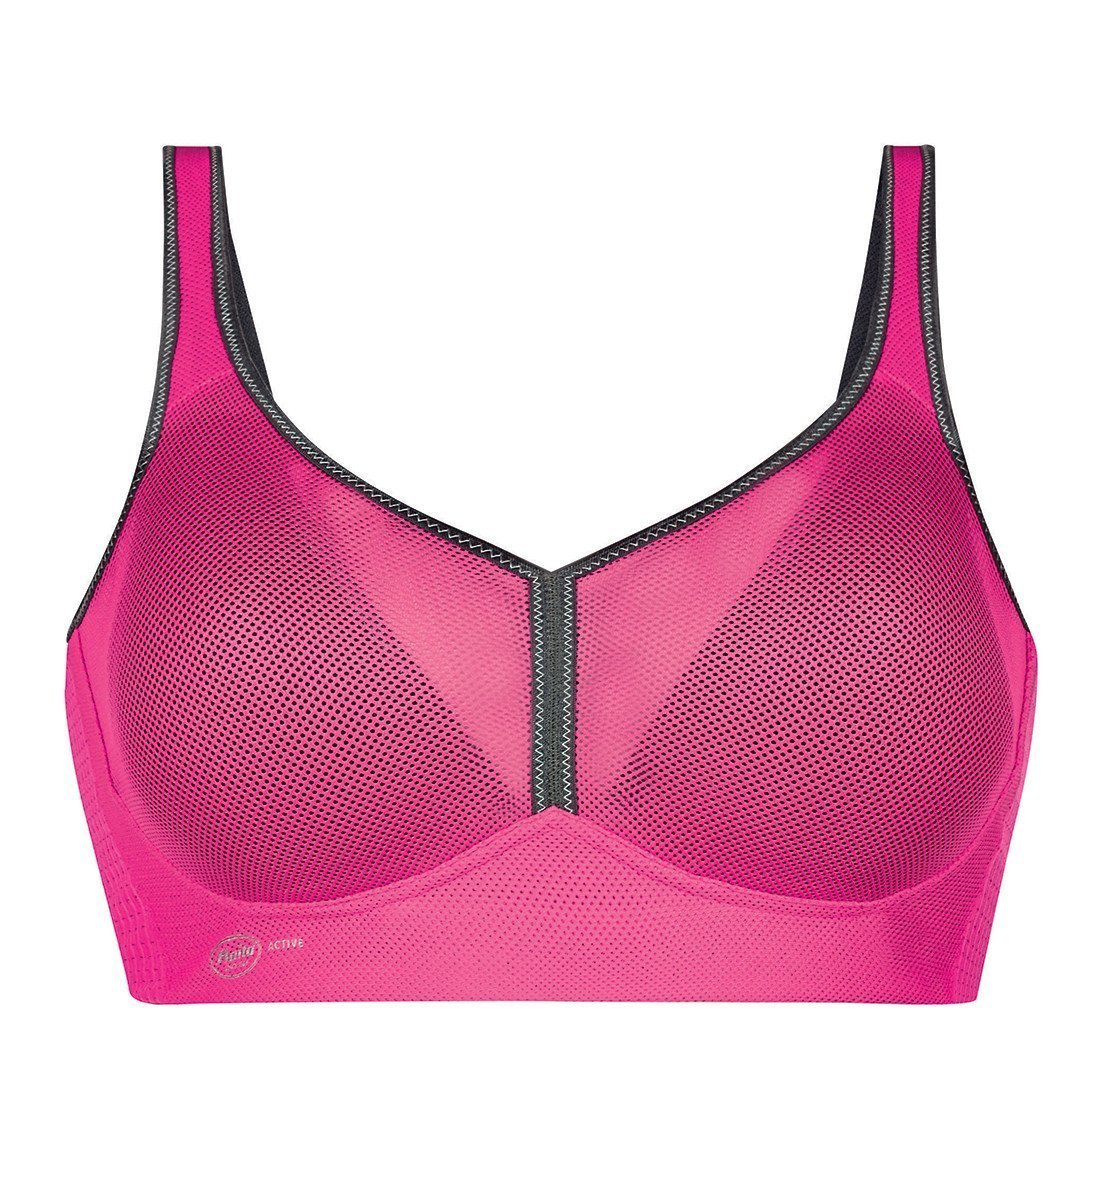 Air Control 5544 Padded Sport Bra by Anita Active - Embrace